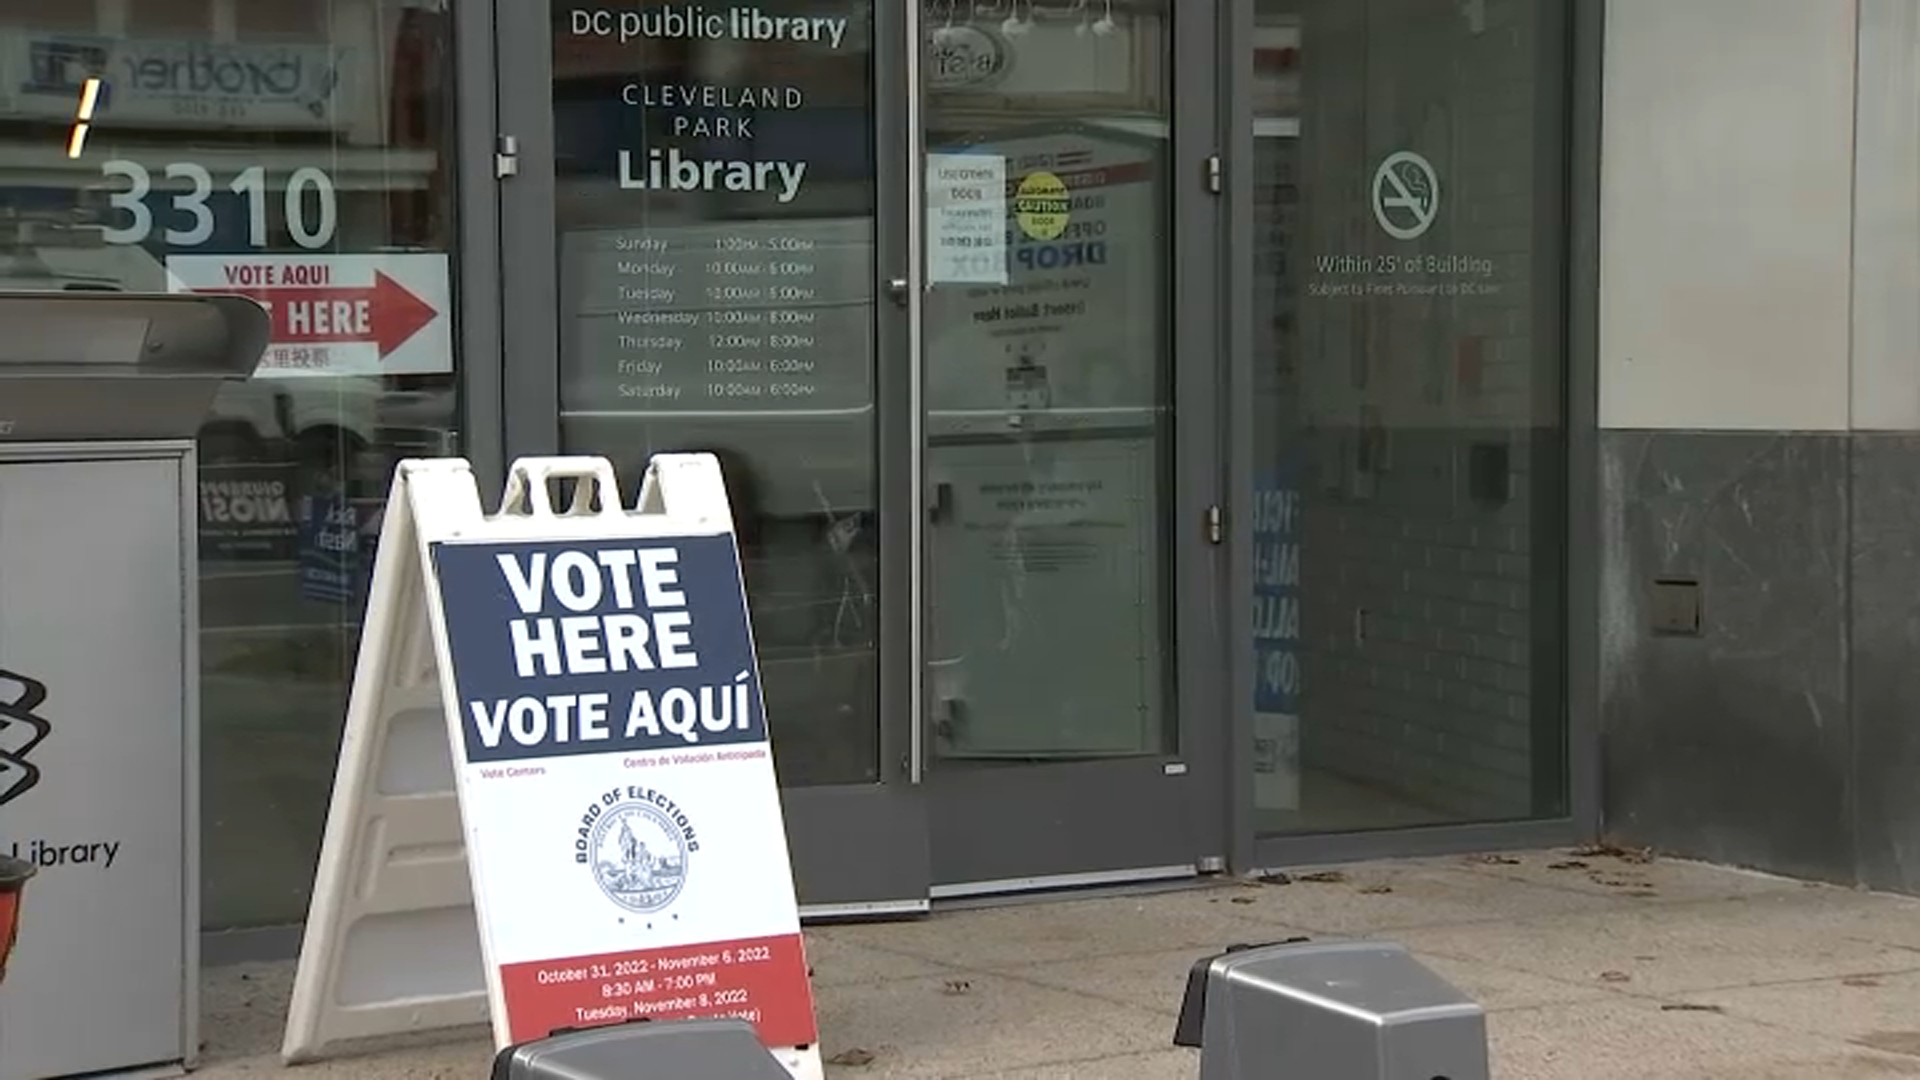 8 Candidates Running for 2 At-Large DC Council Seats